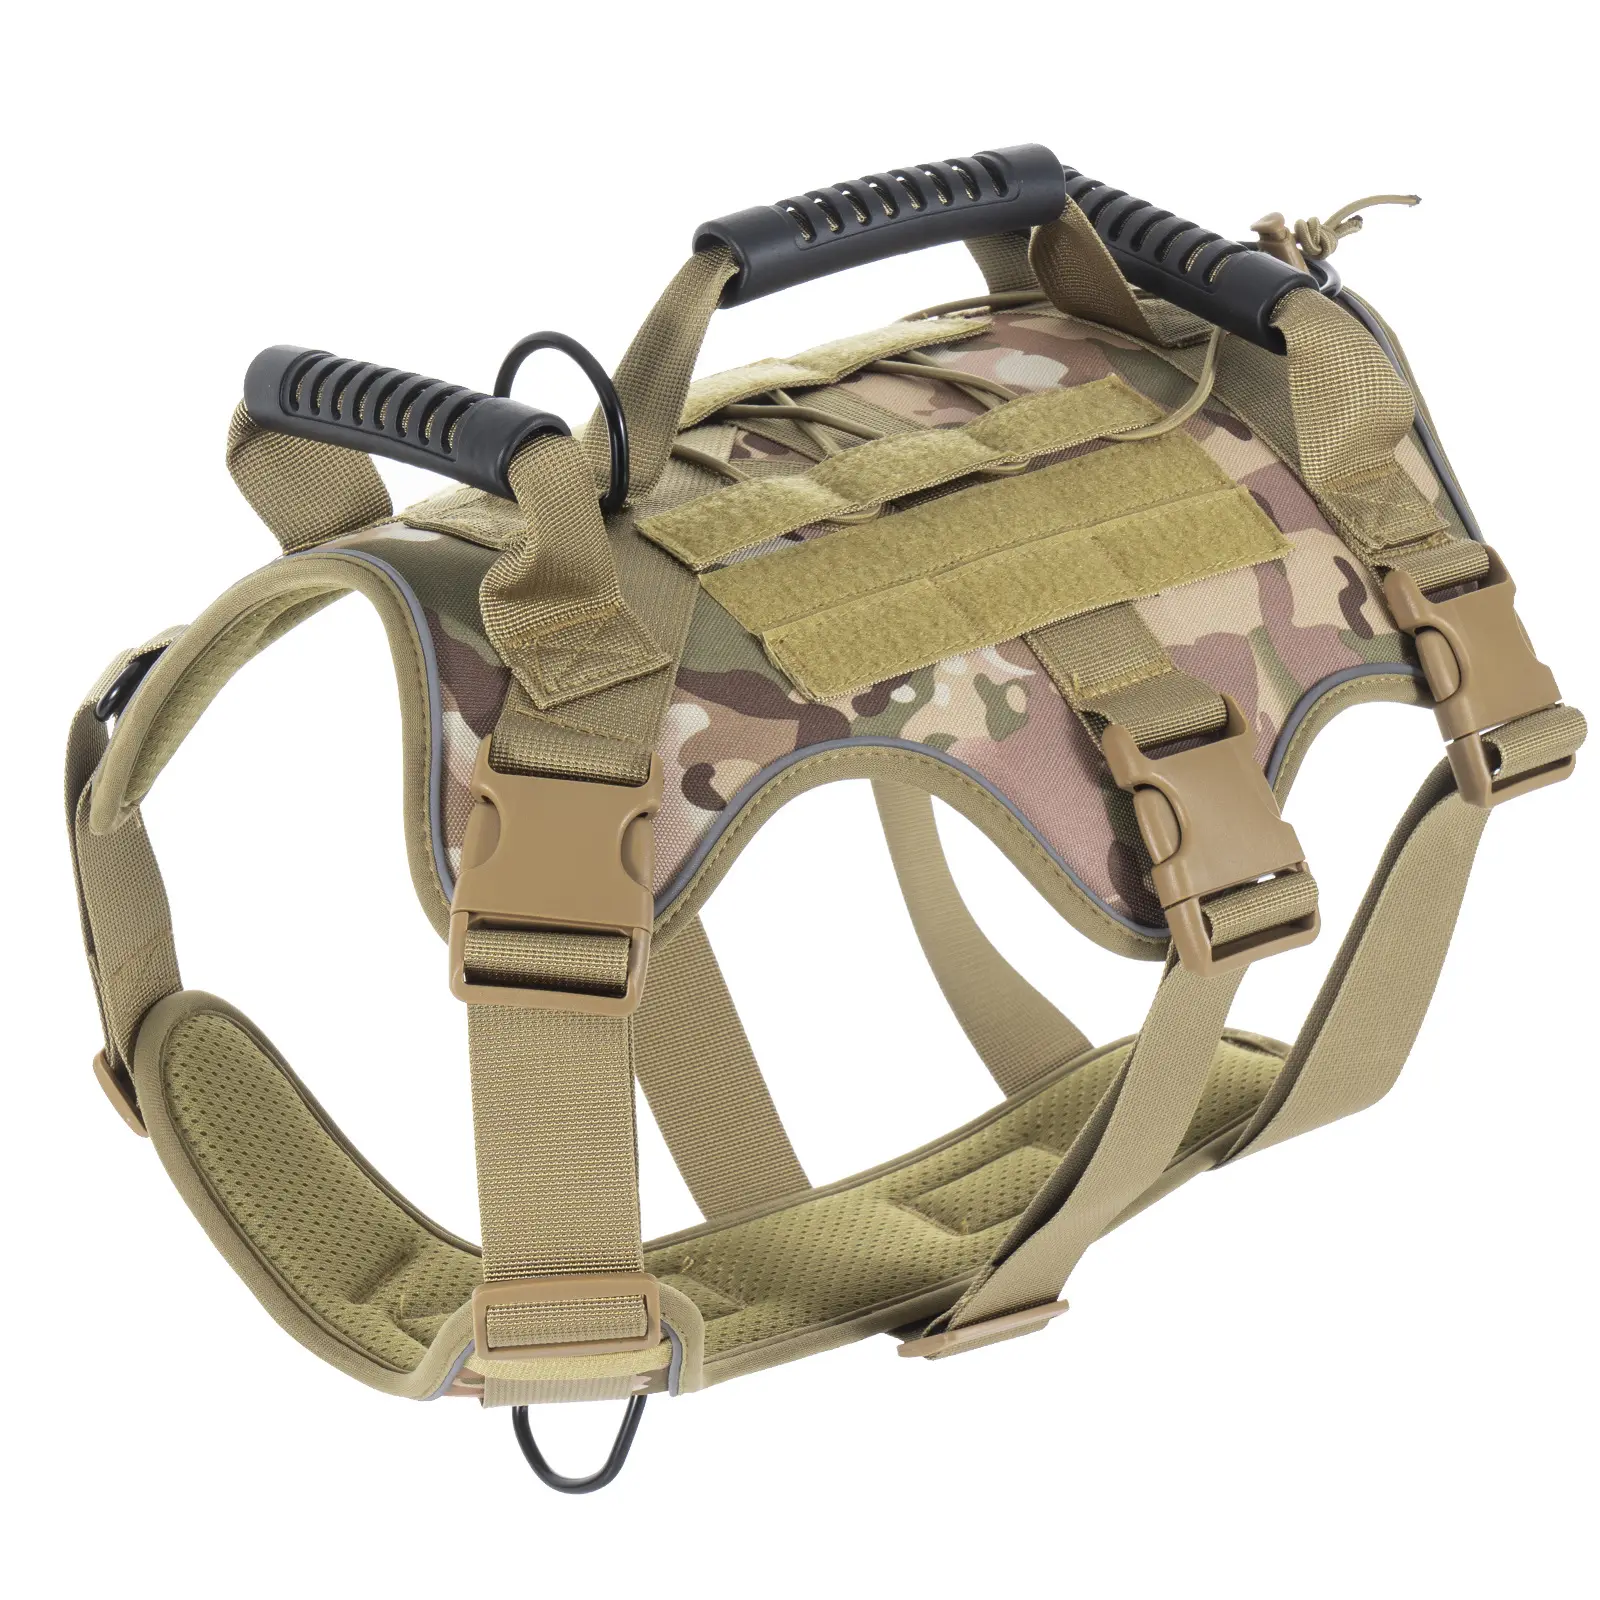 OKKPETS Hot Sale Tactical Dog Harness Adjustable Explosion Proof Punch For Large Dog Outdoor Carrying Body Protection